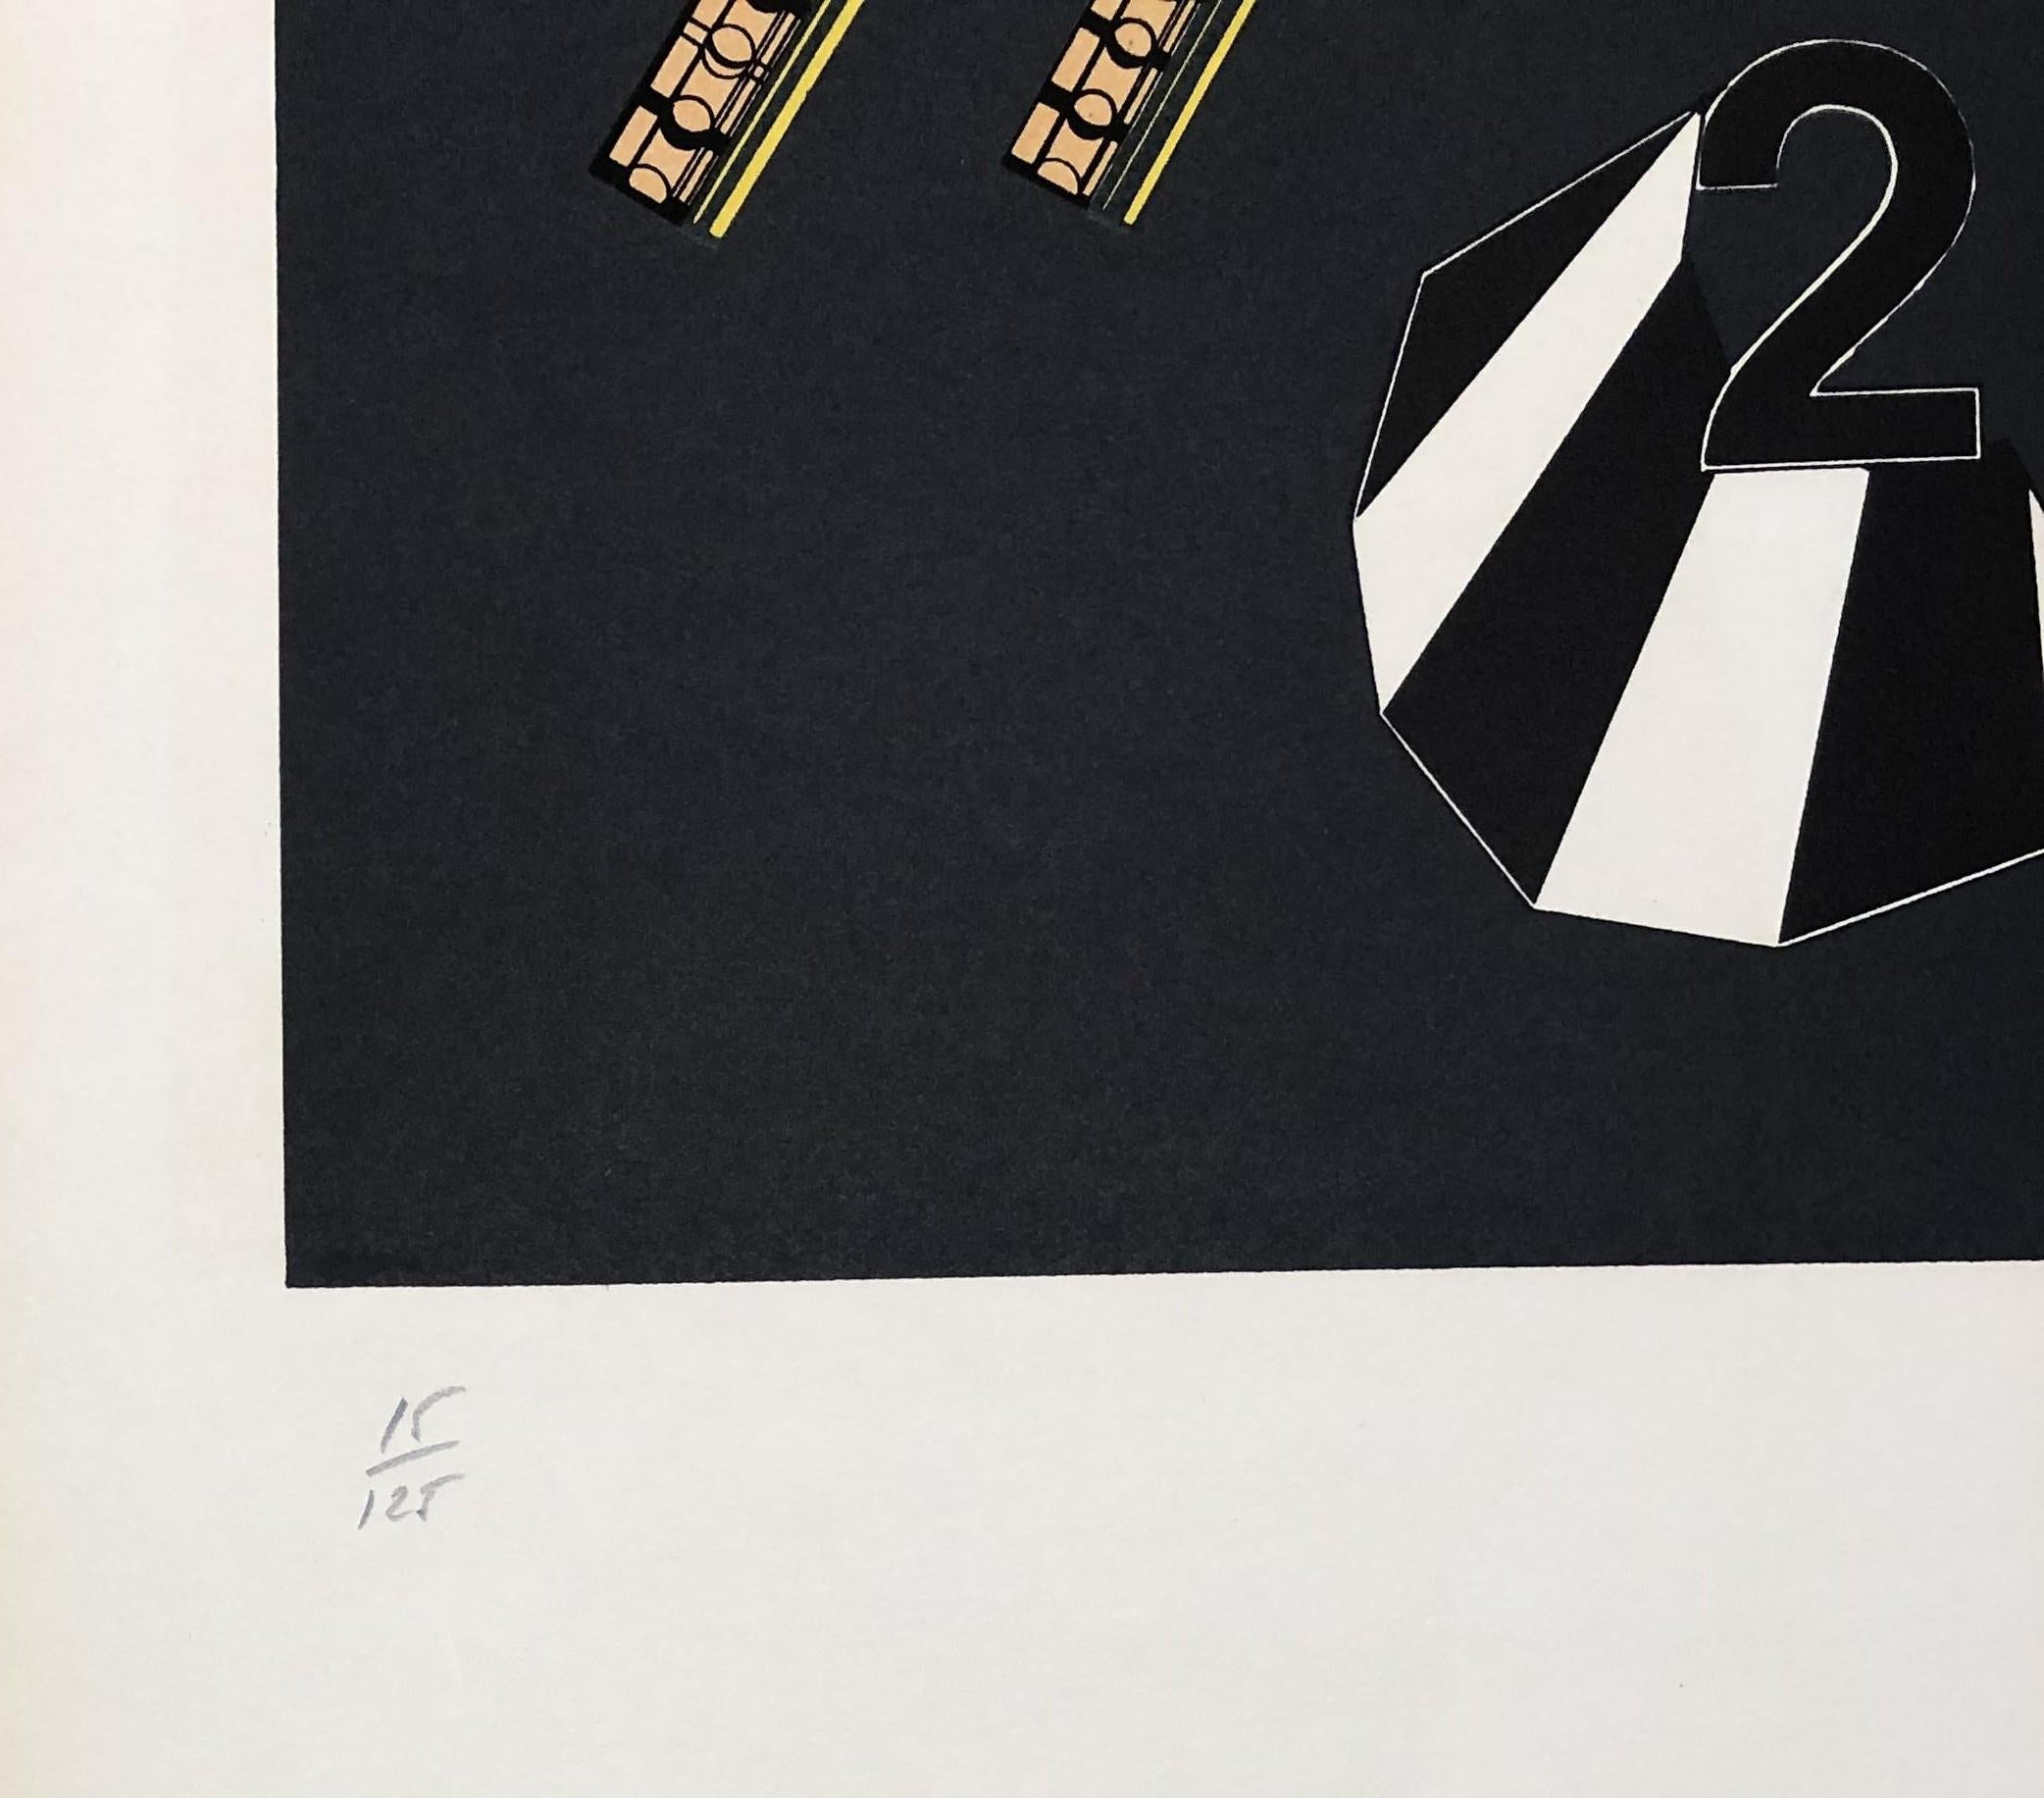 Composition - Original Lithograph Handsigned - 125 copies - Black Abstract Print by Alain Le Yaouanc